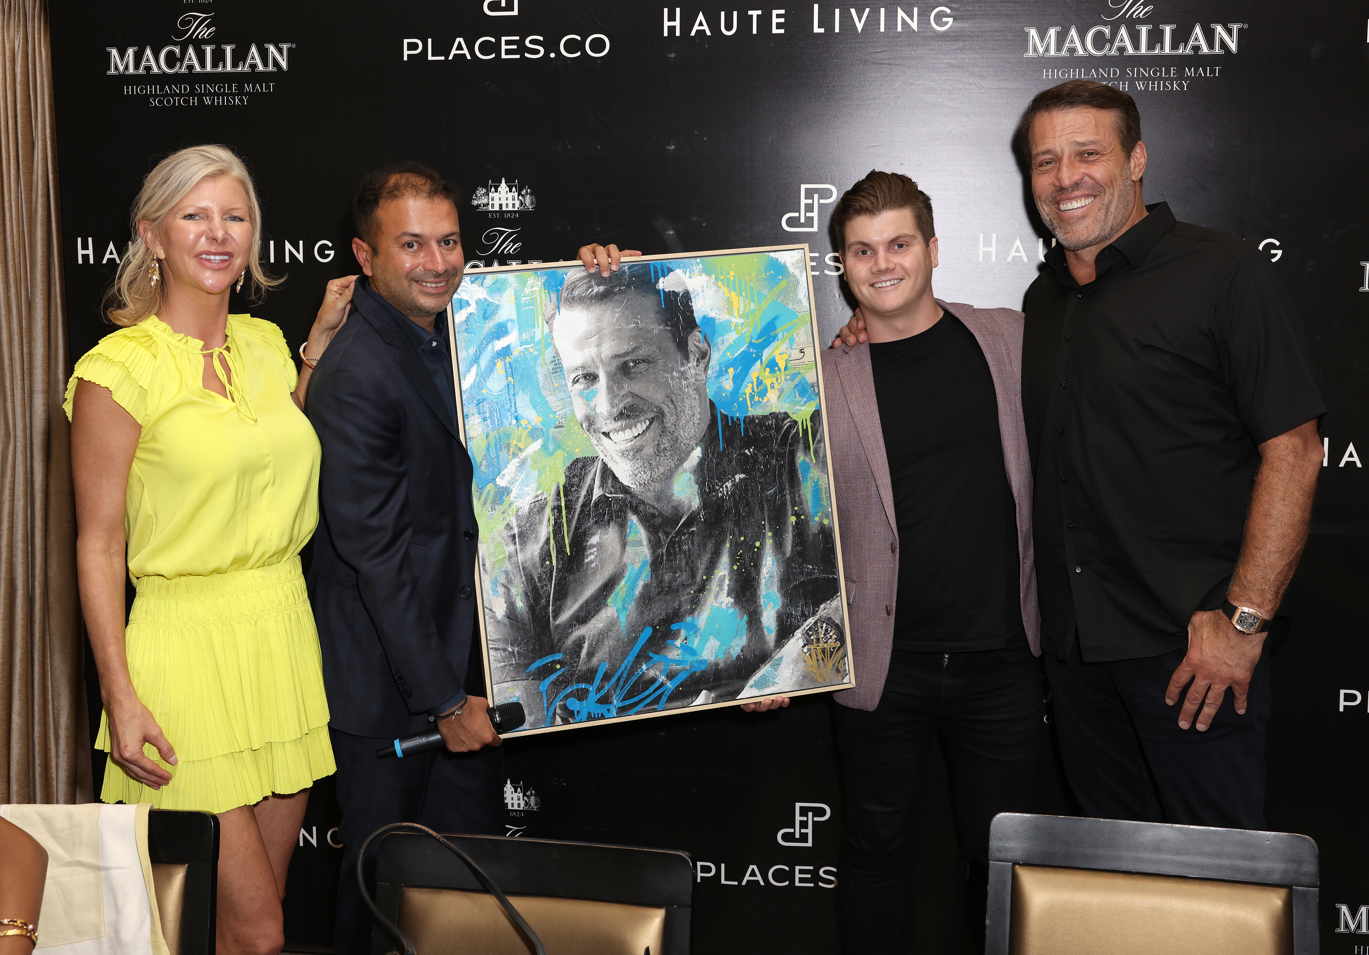 Haute Living Celebrates Tony Robbins With Places.co And The Macallan